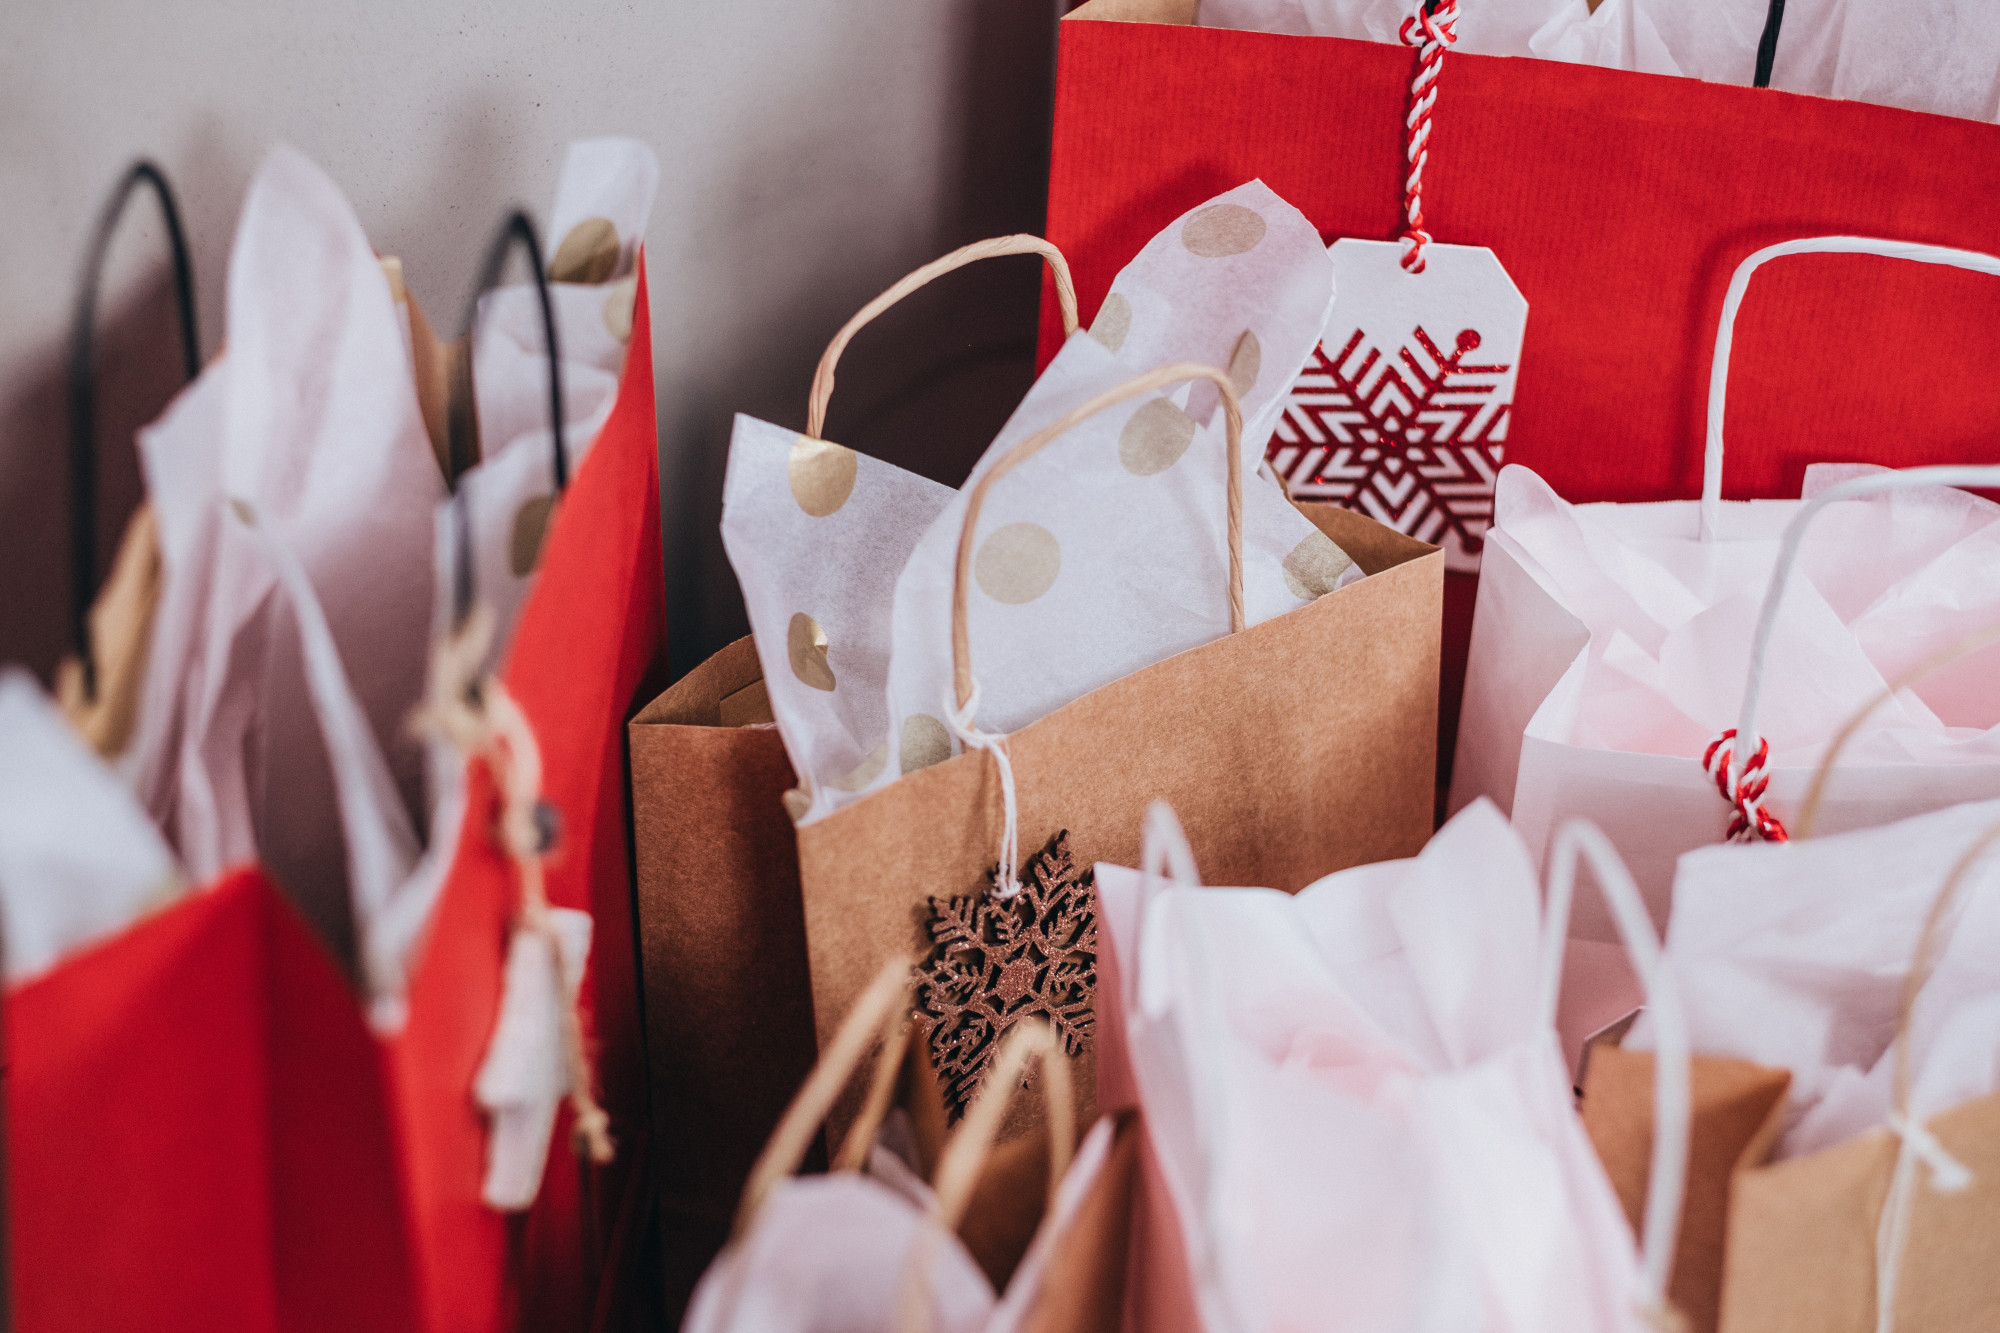 Supply chain backups mean you should do your Christmas, Hanukkah and other holiday shopping now